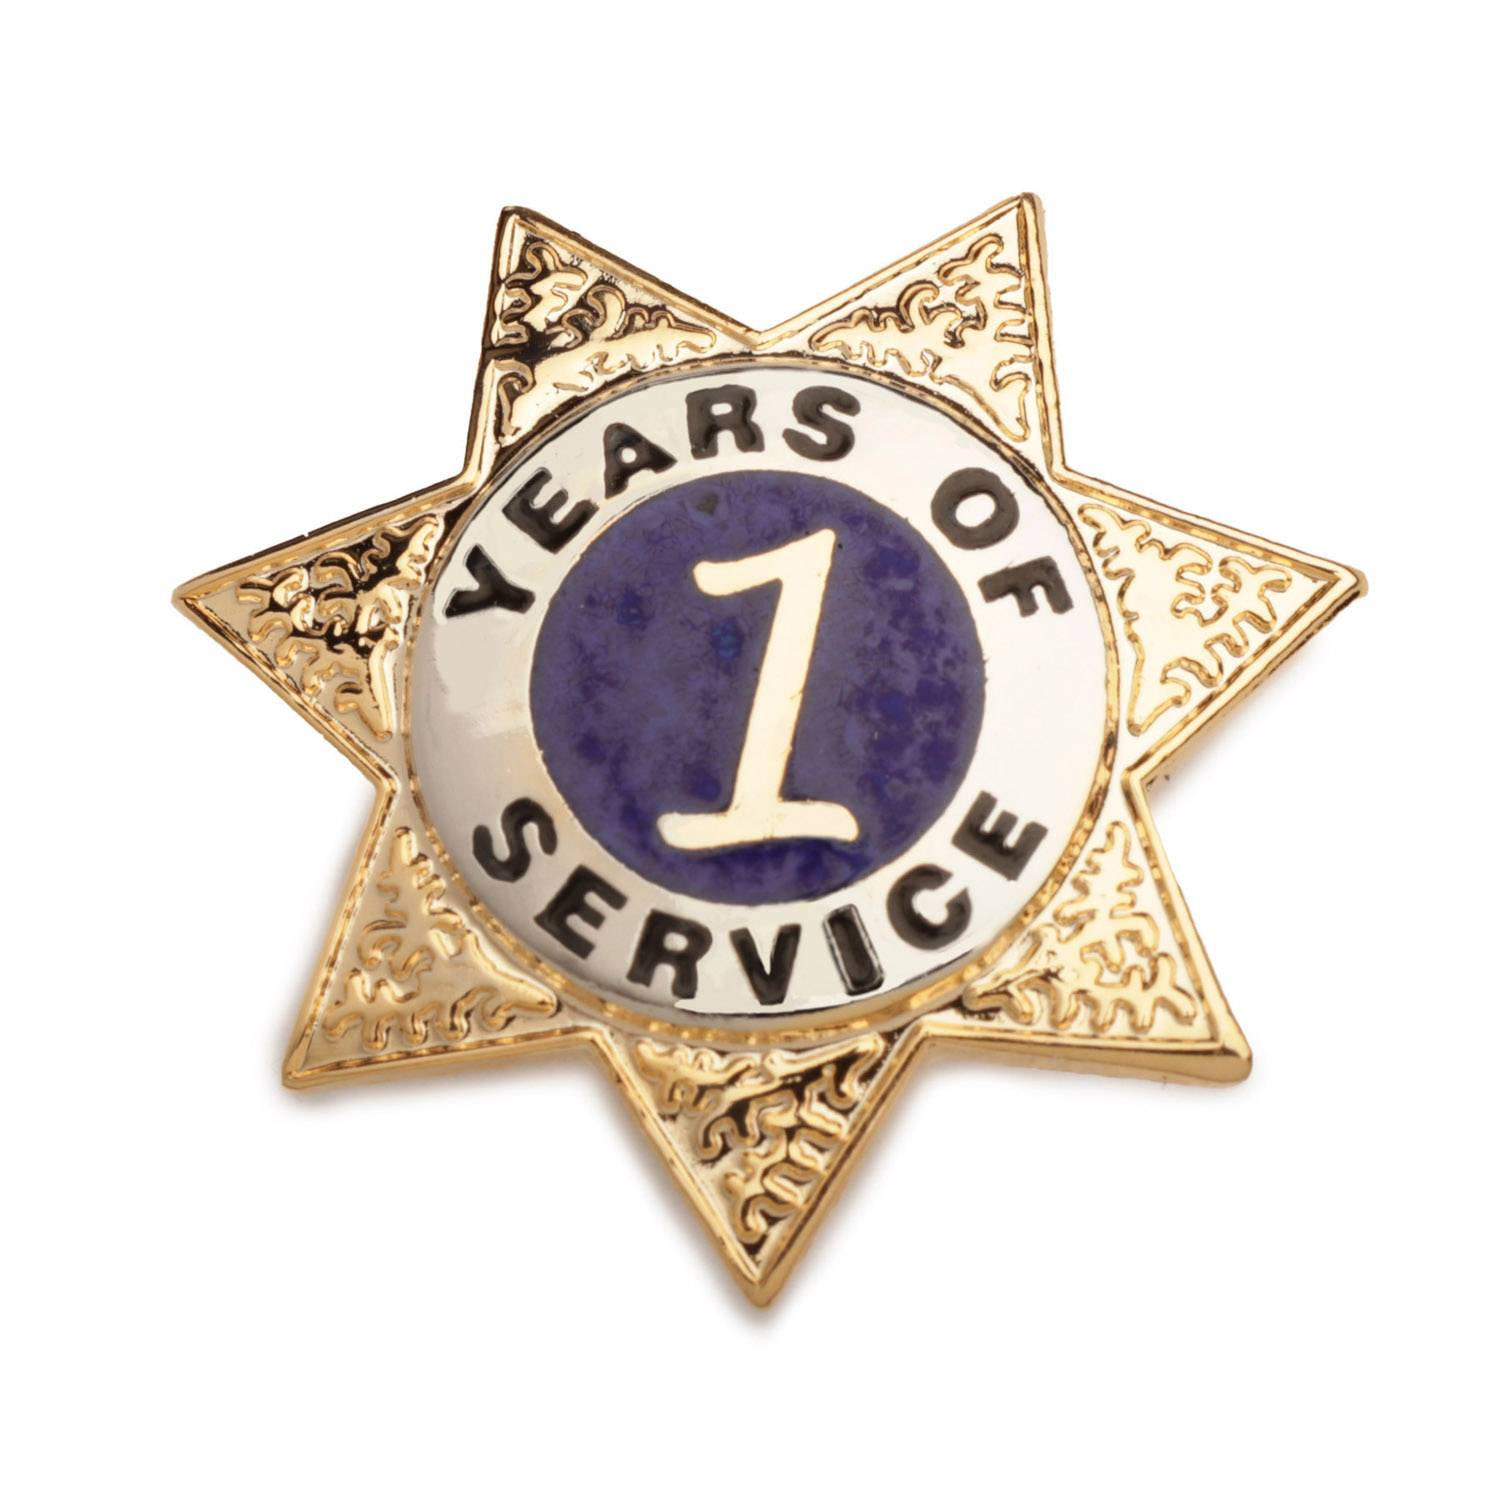 LAWPRO YEARS OF SERVICE PINS (6 PACK)